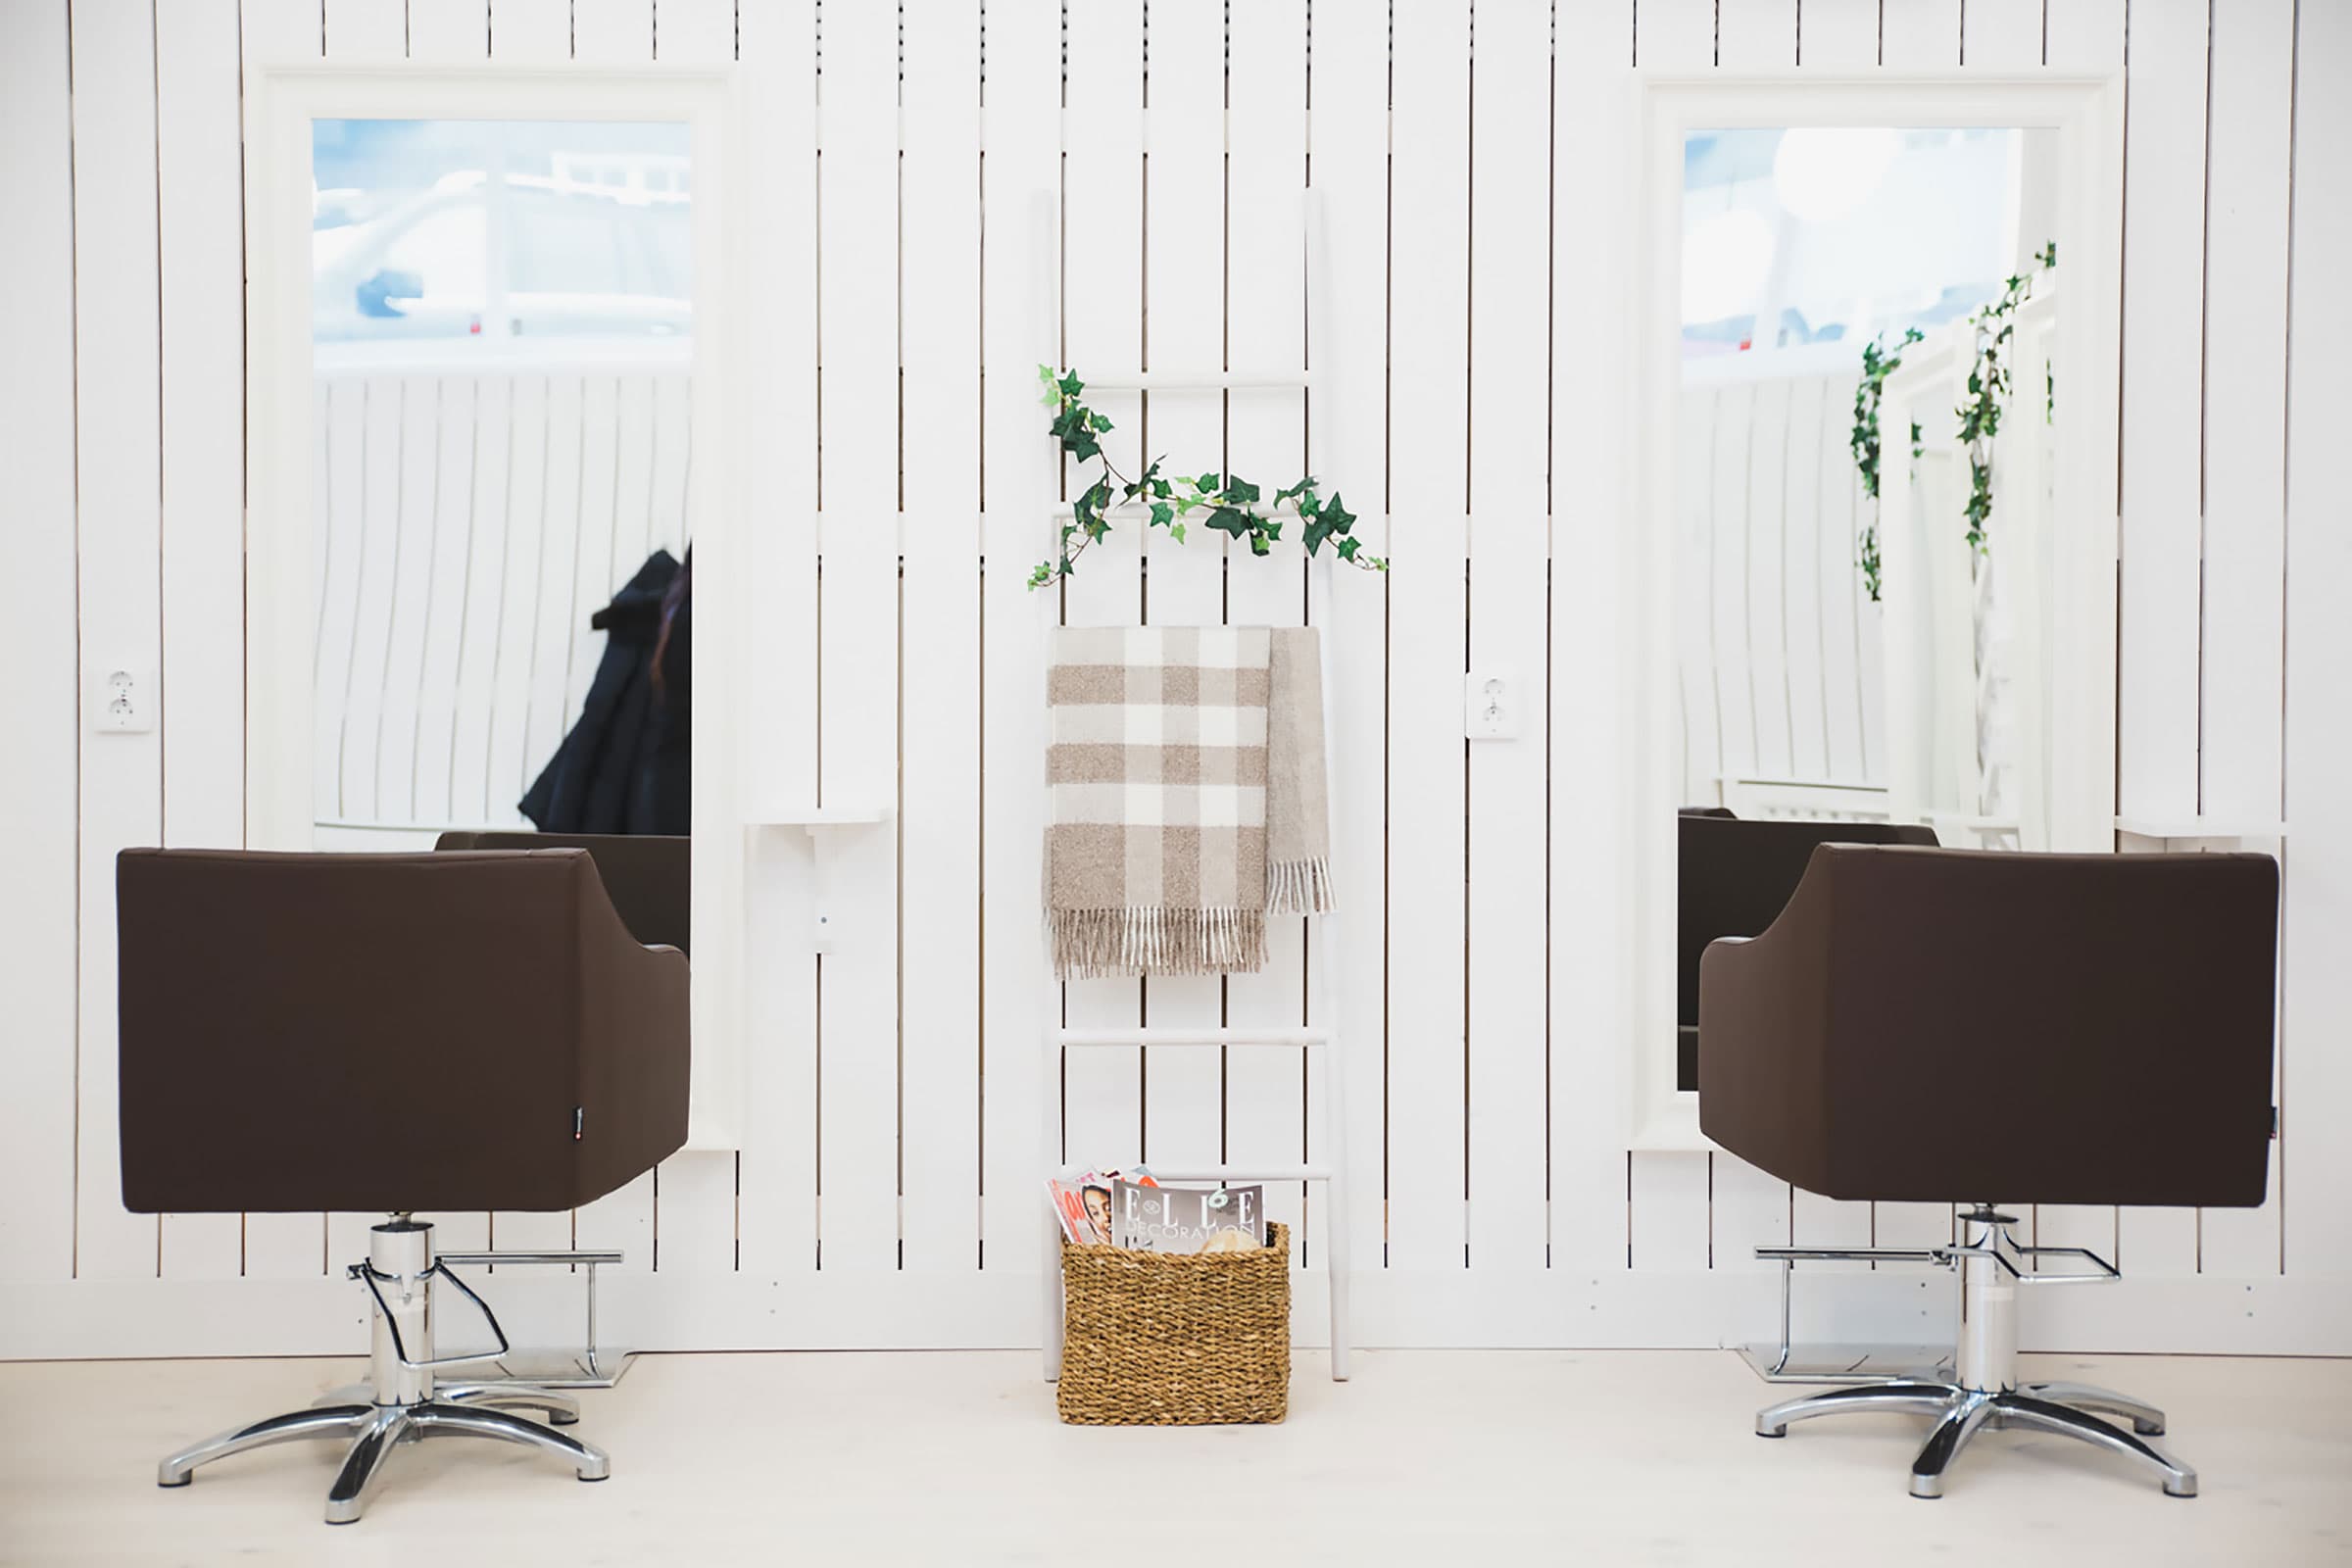 The guide to Uppsala's best hairdressers